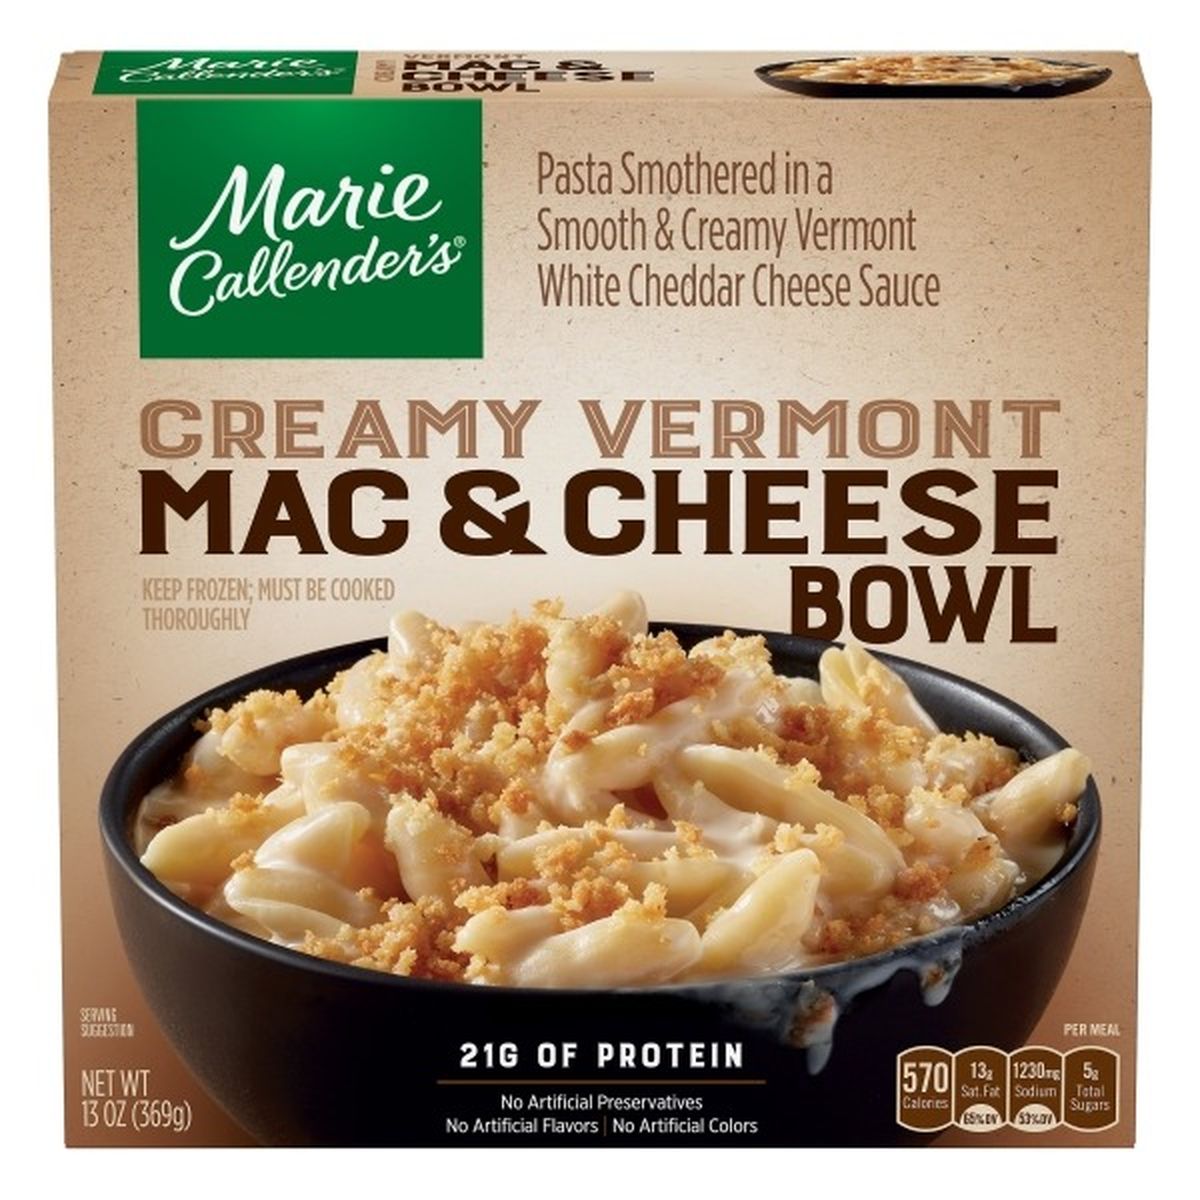 Calories in Marie Callender's Creamy Vermont Mac & Cheese Bowl